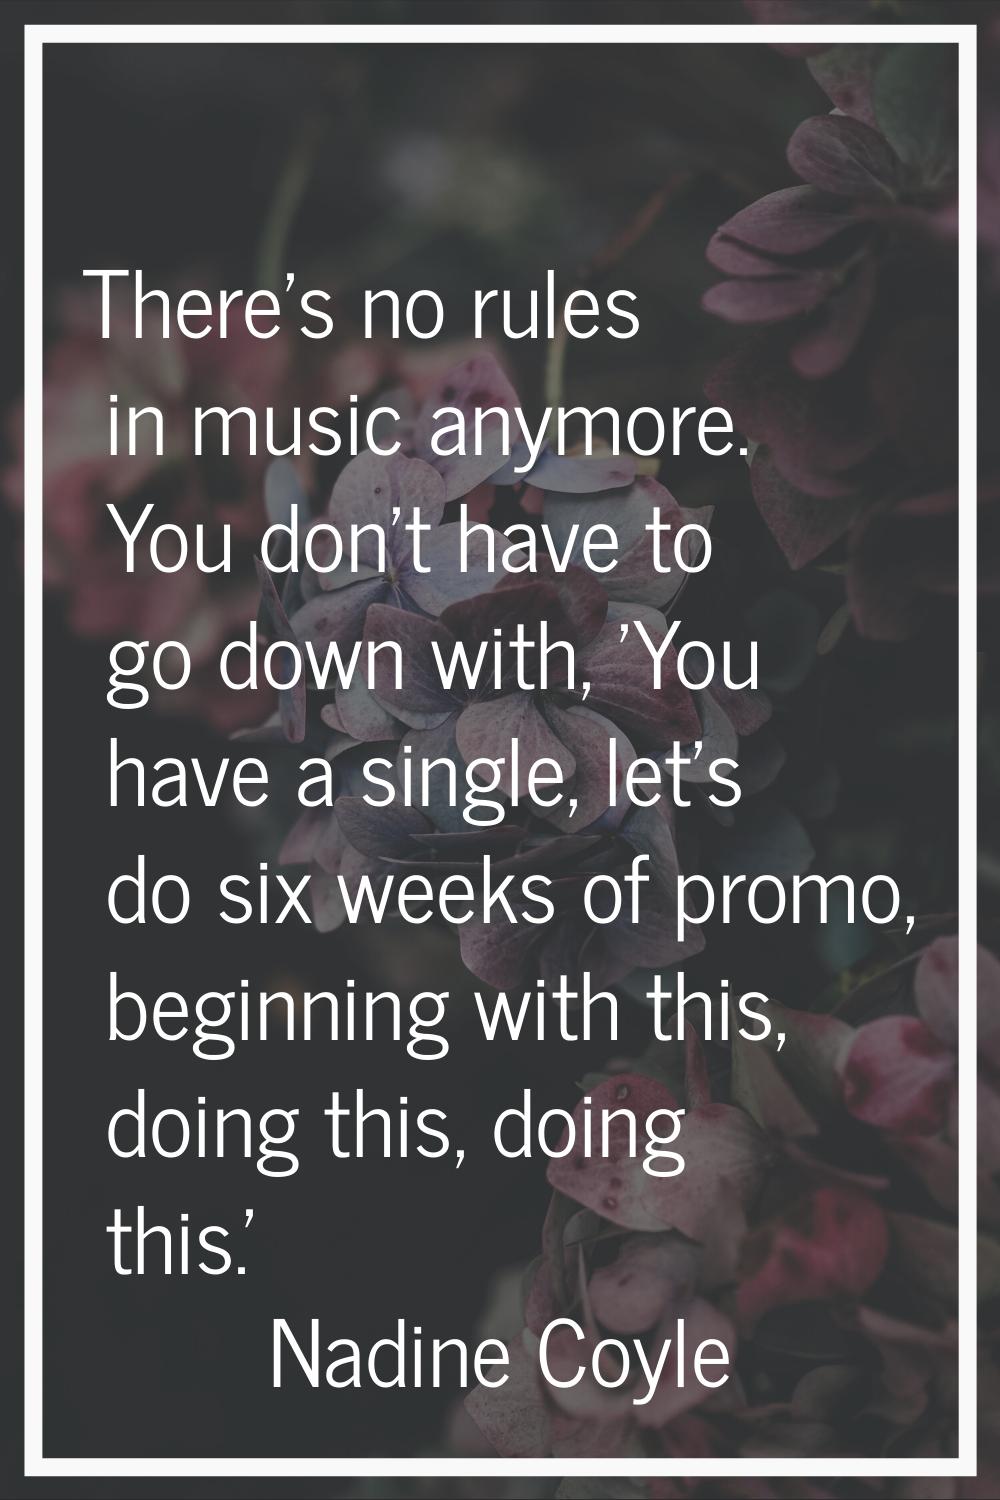 There's no rules in music anymore. You don't have to go down with, 'You have a single, let's do six